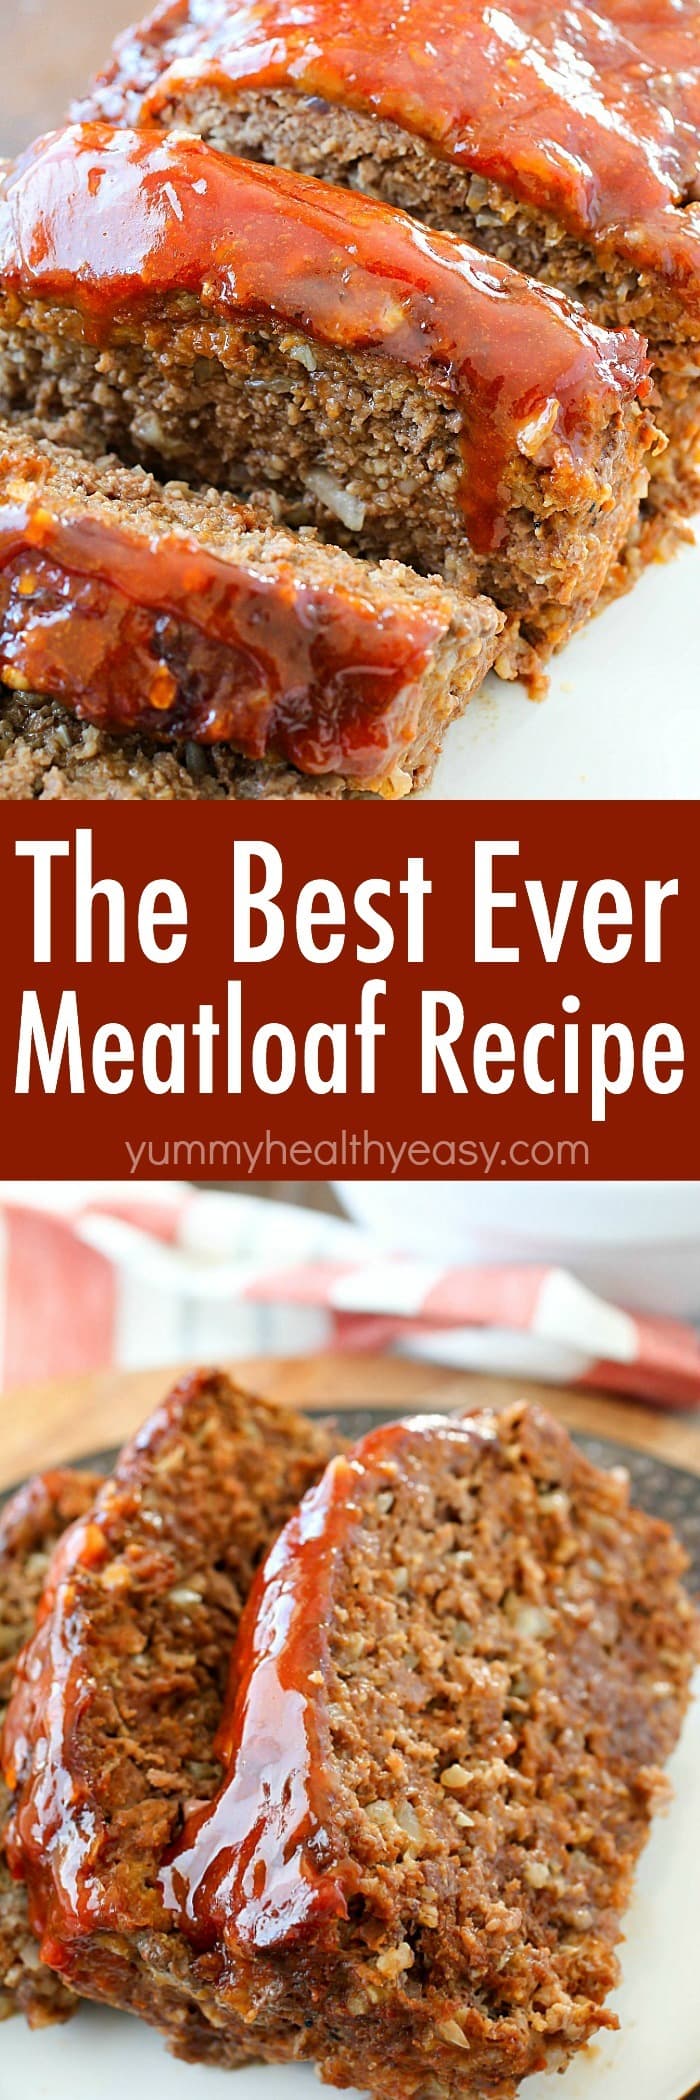 This Meatloaf Recipe is my family's FAVORITE Sunday night dinner! It really is the Best Ever Meatloaf, and it is incredibly easy to make. So much flavor packed inside with a delicious glaze spread on the top!  via @jennikolaus